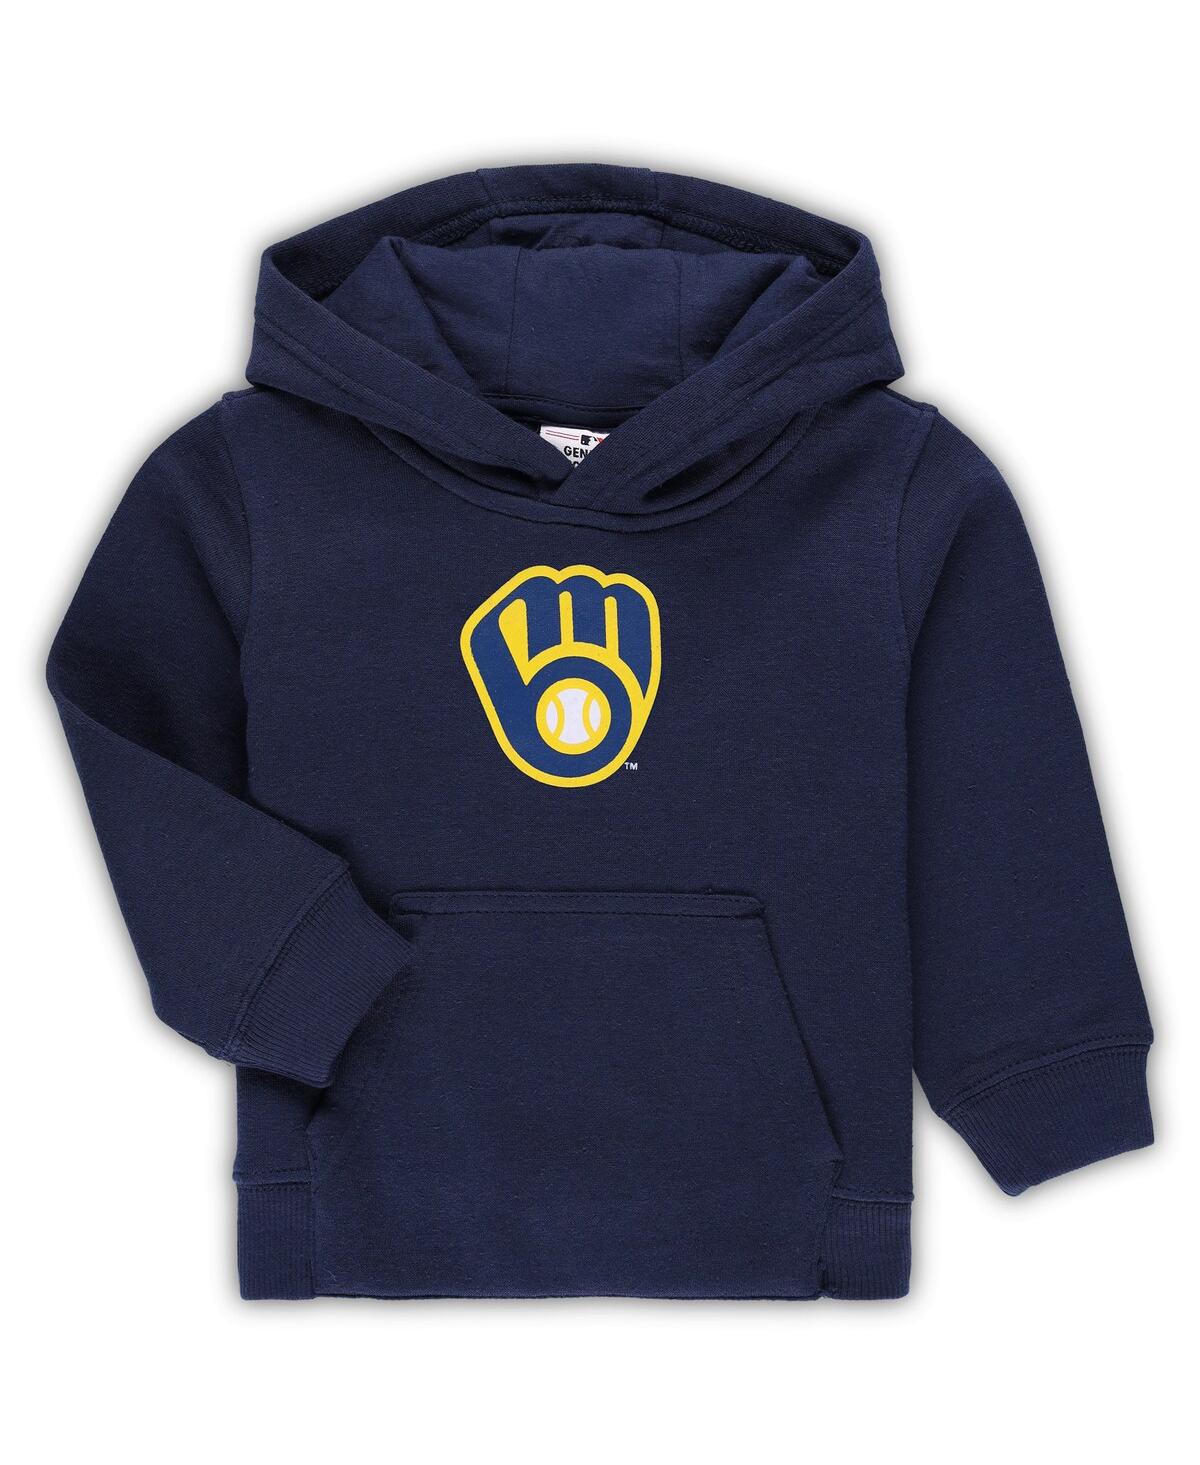 Outerstuff Babies' Toddler Boys And Girls Navy Milwaukee Brewers Team Primary Logo Fleece Pullover Hoodie